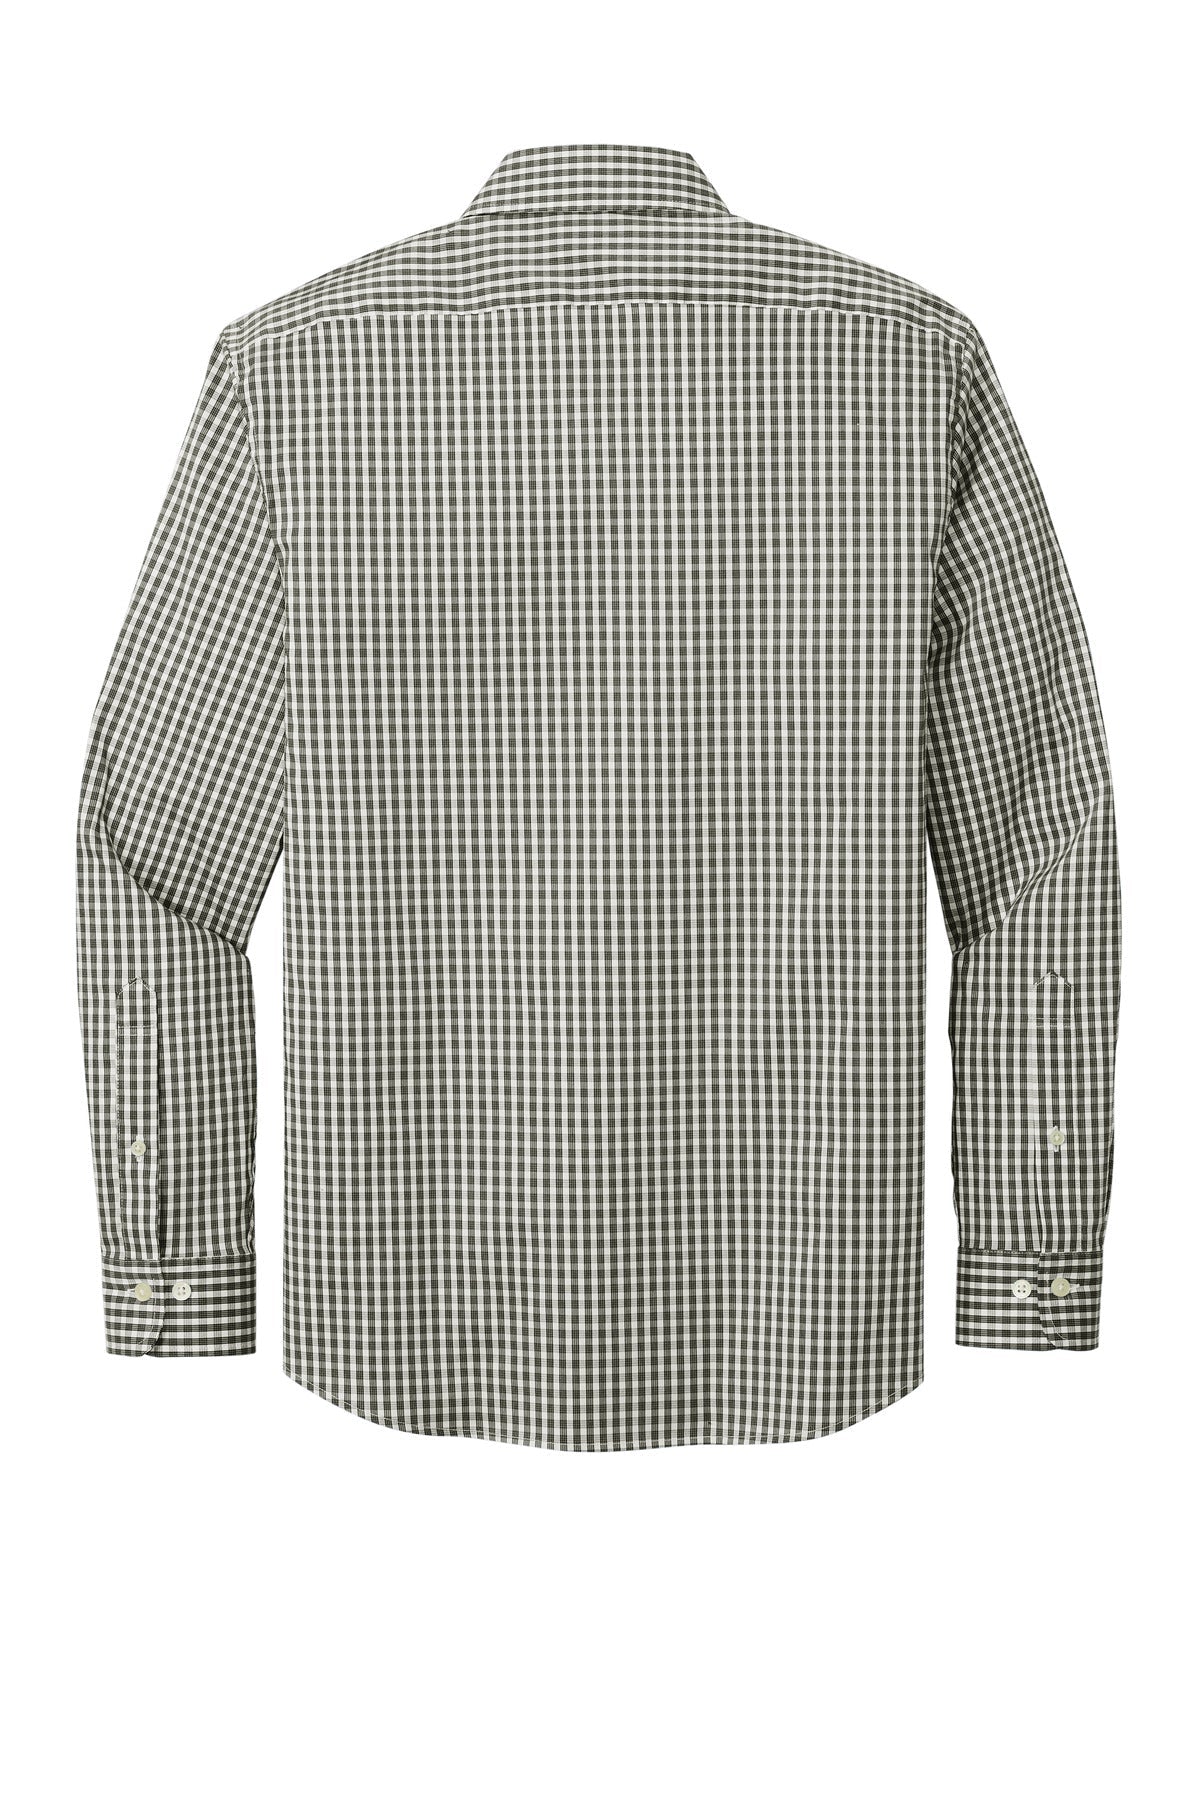 Brooks Brothers® Tech Stretch Patterned Shirt BB18006 - DFW Impression